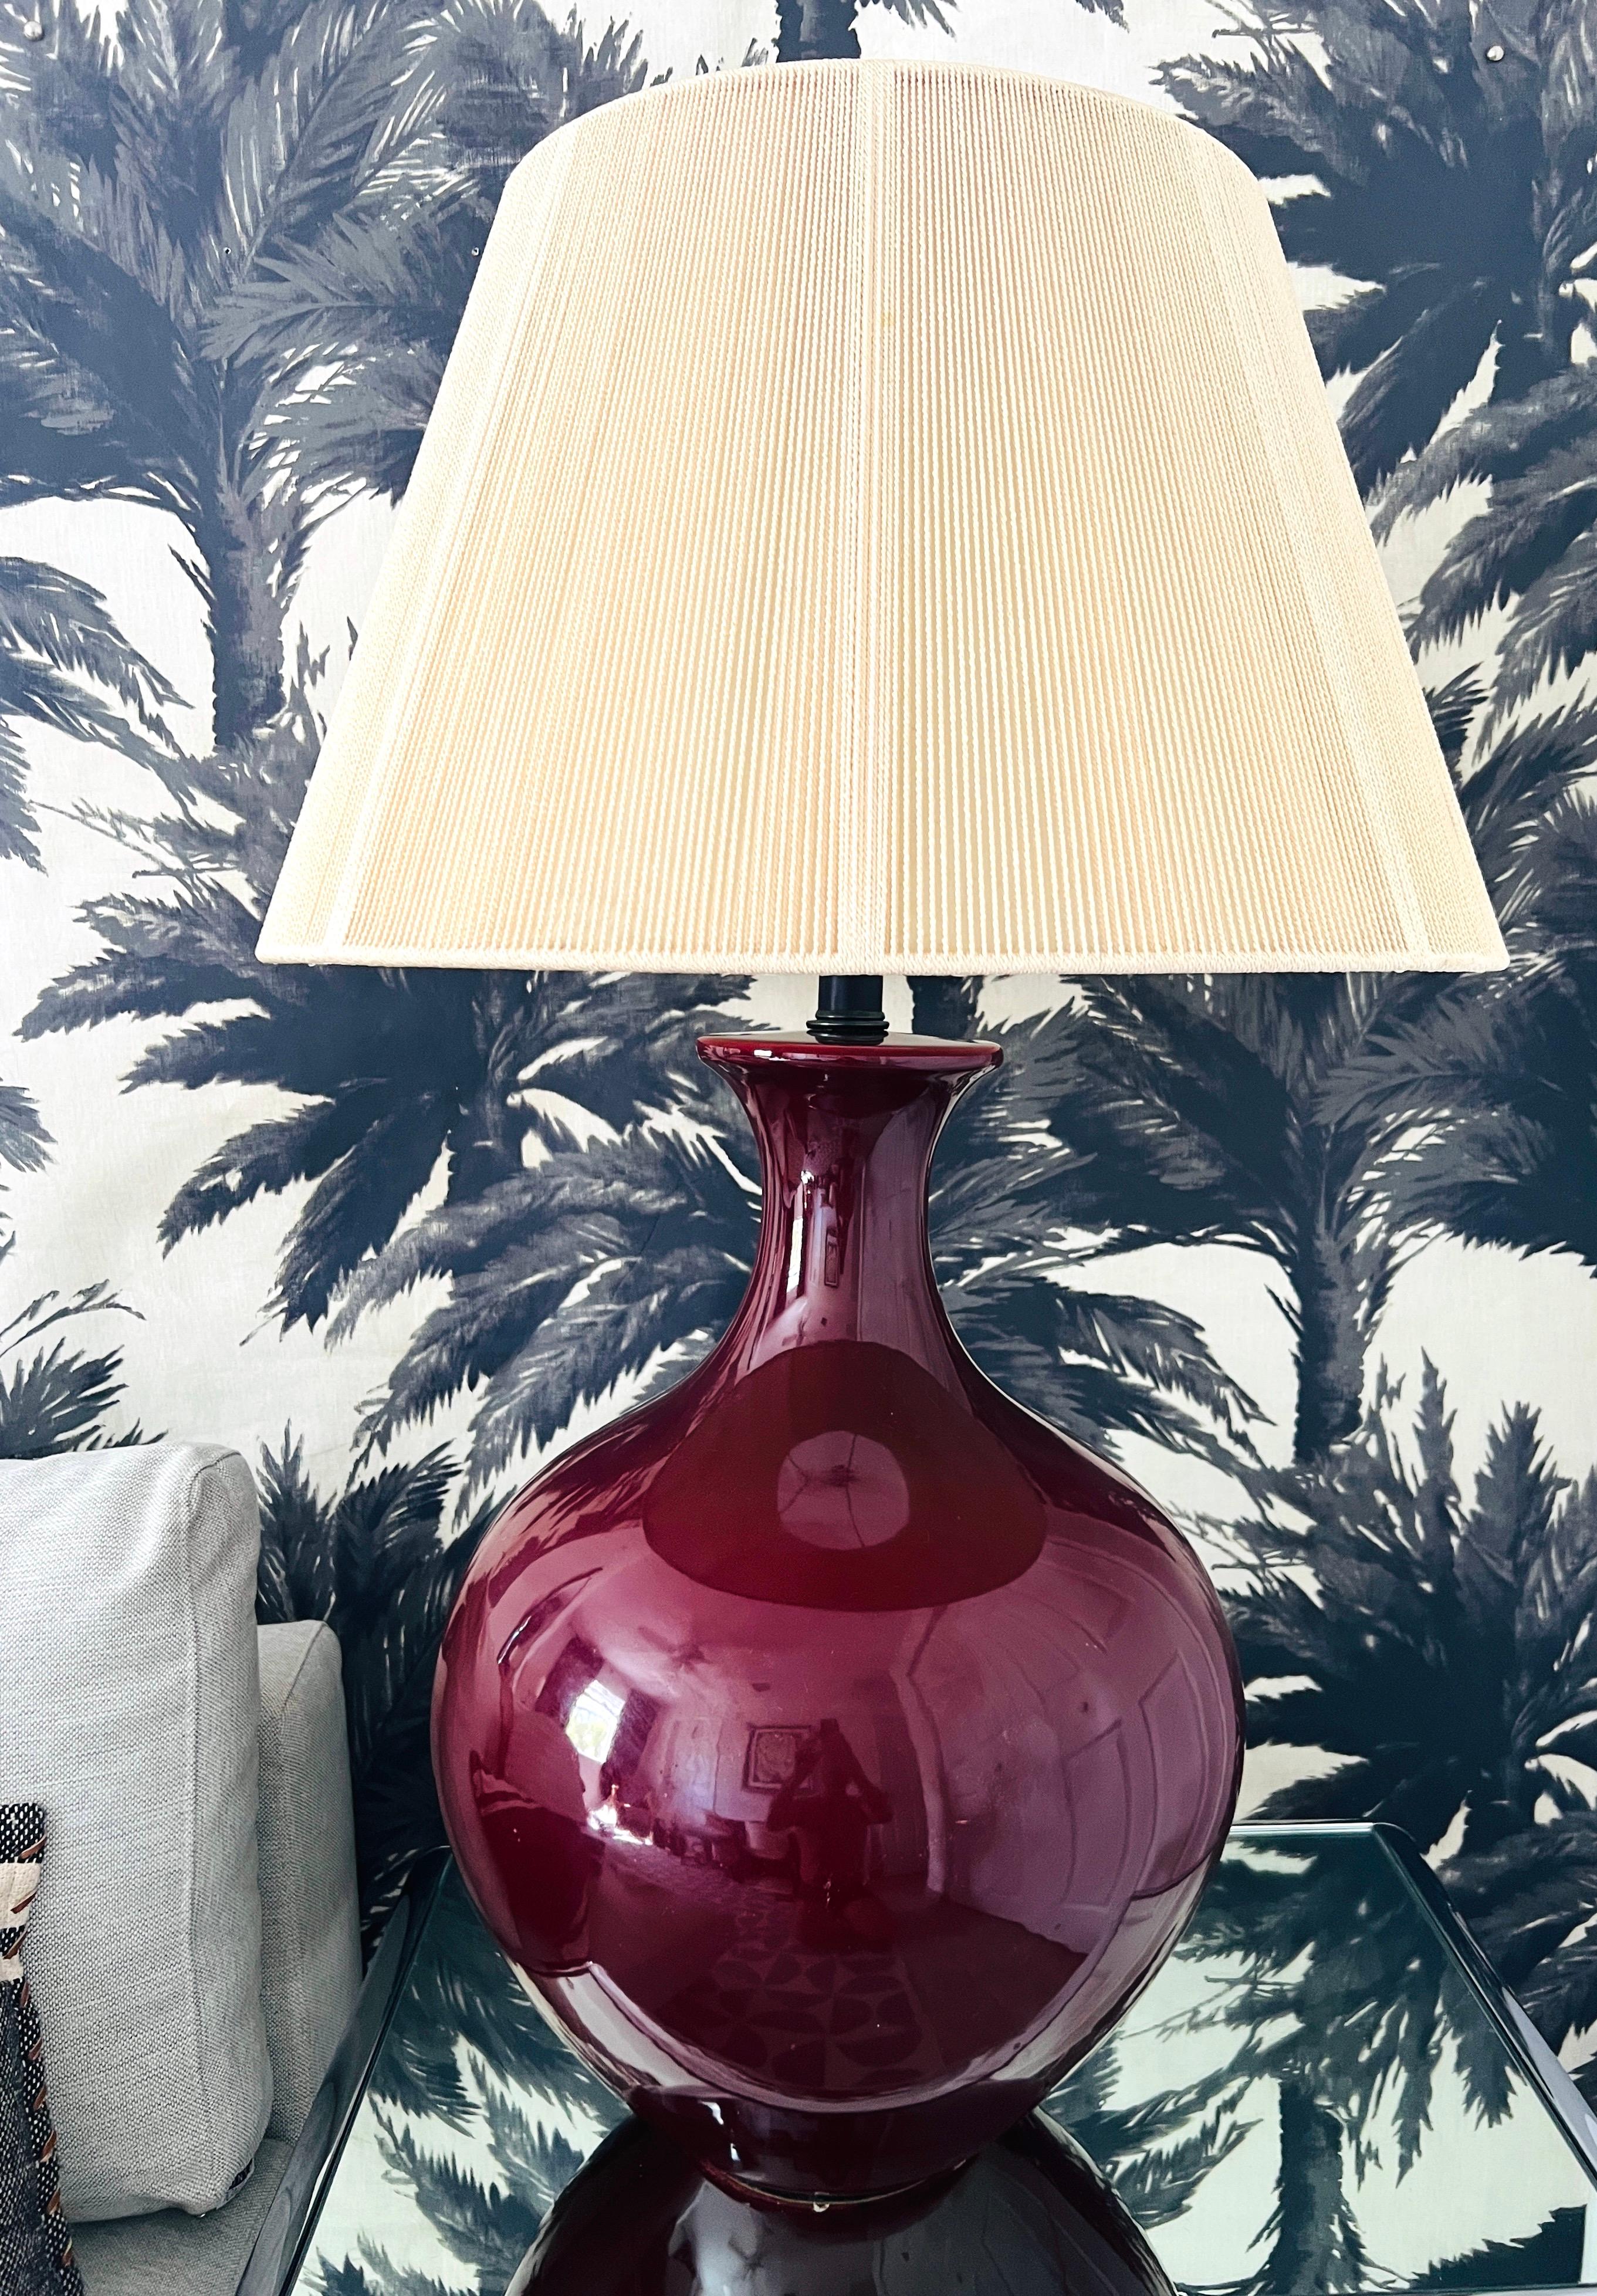 1970's monumental oxblood lamp in a deep red burgundy glazed porcelain. The Chinese inspired design features a very large bulbous base with a sinuous form and tapered stem. Includes original large-scale cream colored string shade. Chic and